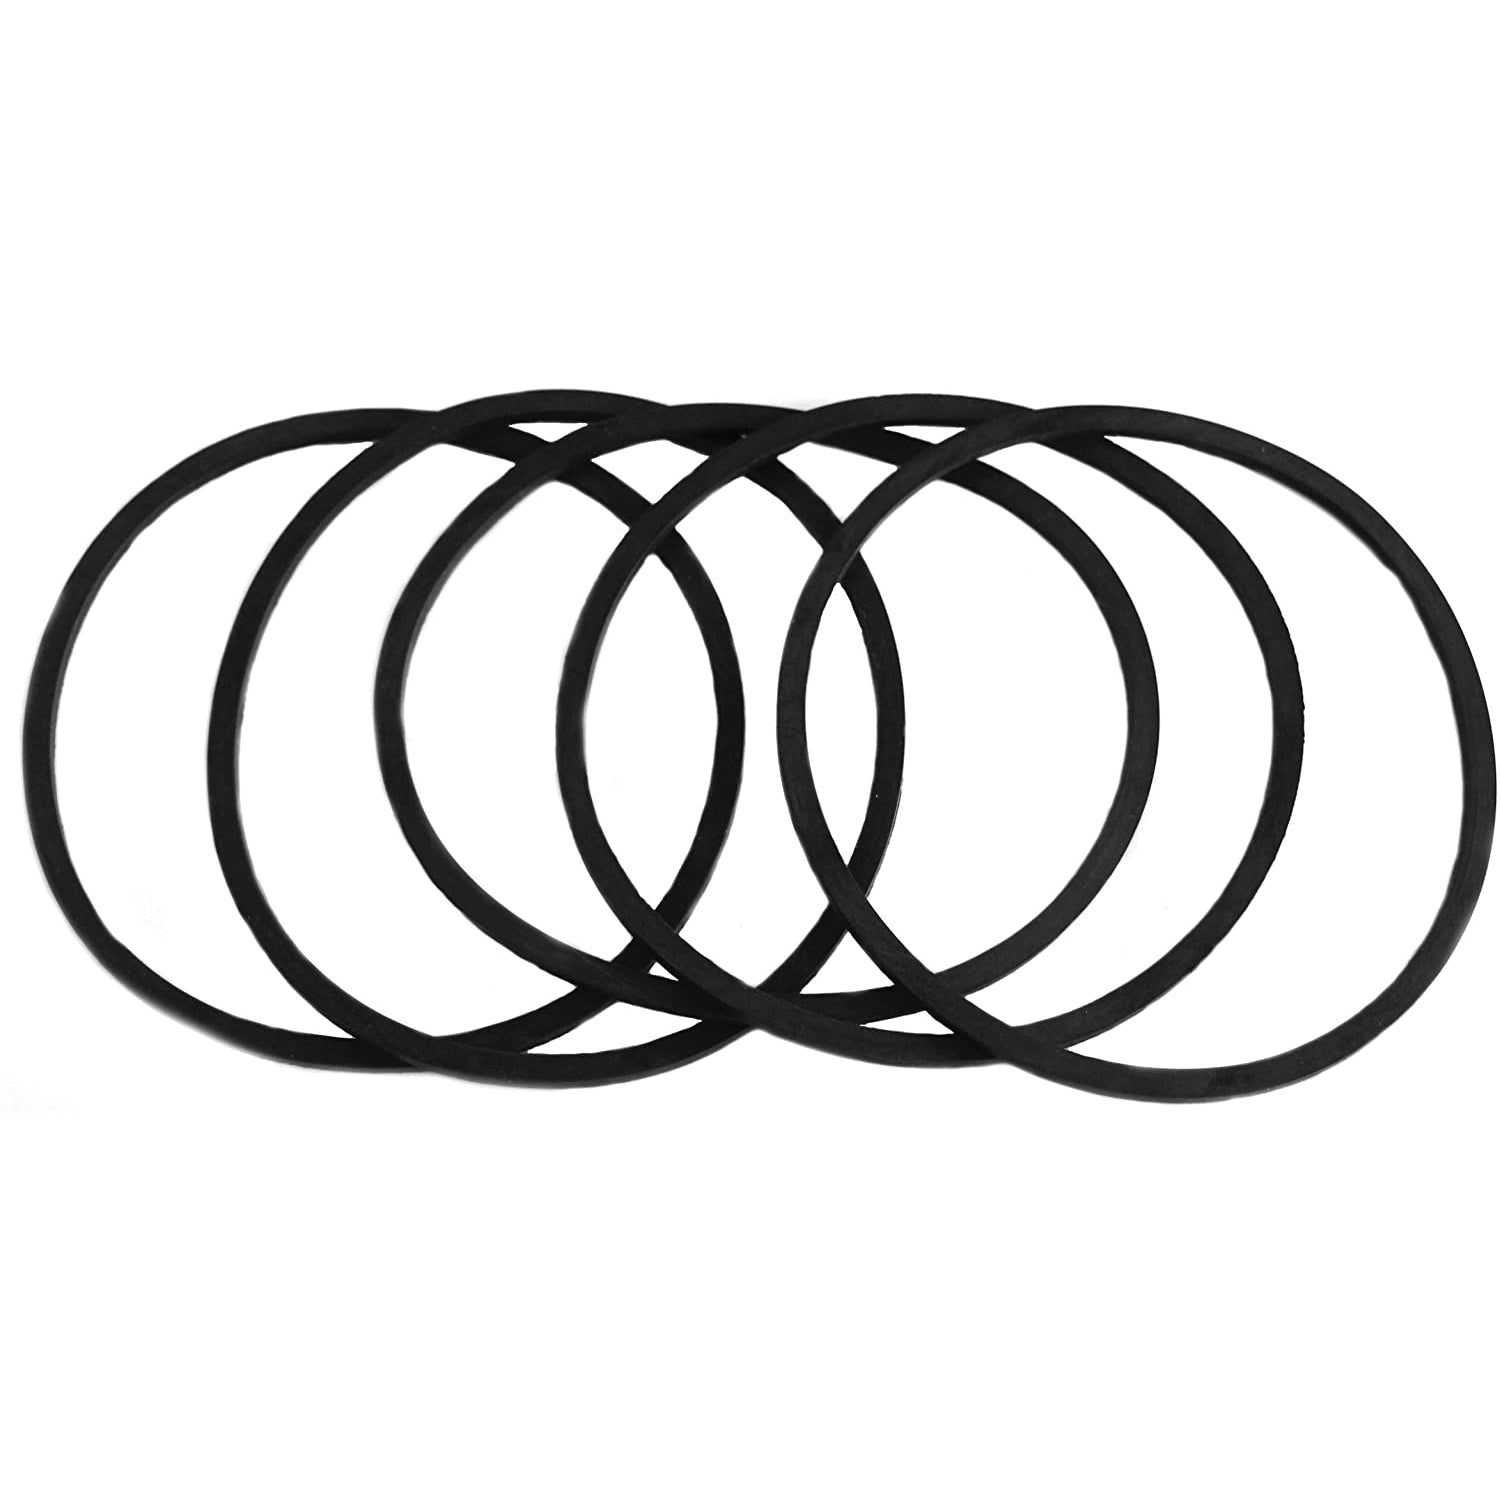 Fuji 9050-5 Pack of 5 400cc Gravity Cup Gaskets - The Paint People